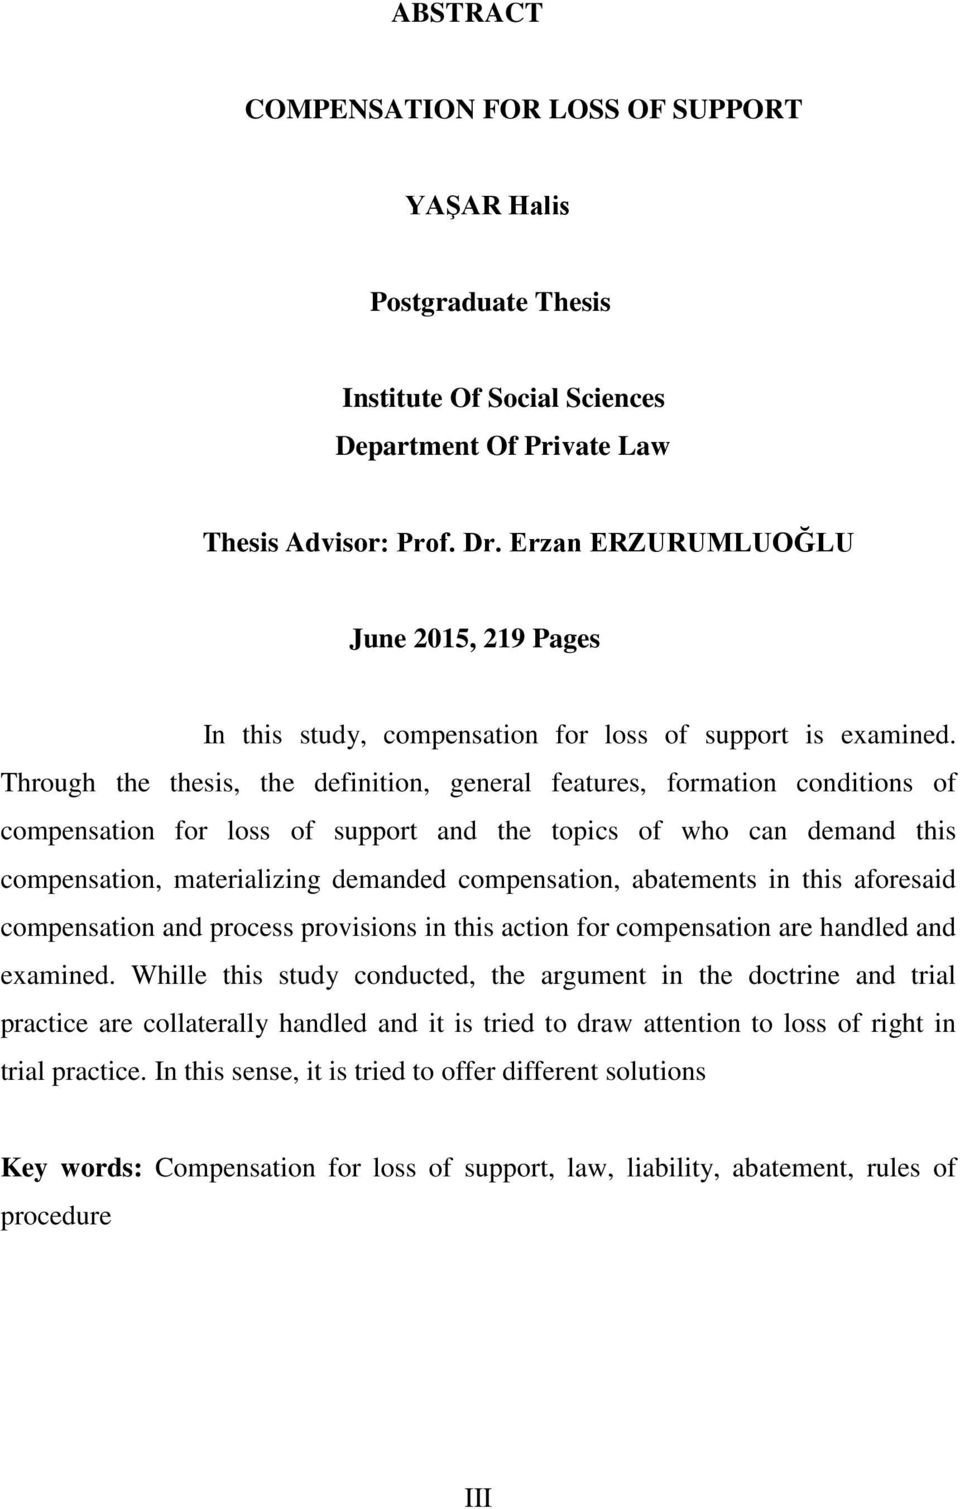 Through the thesis, the definition, general features, formation conditions of compensation for loss of support and the topics of who can demand this compensation, materializing demanded compensation,